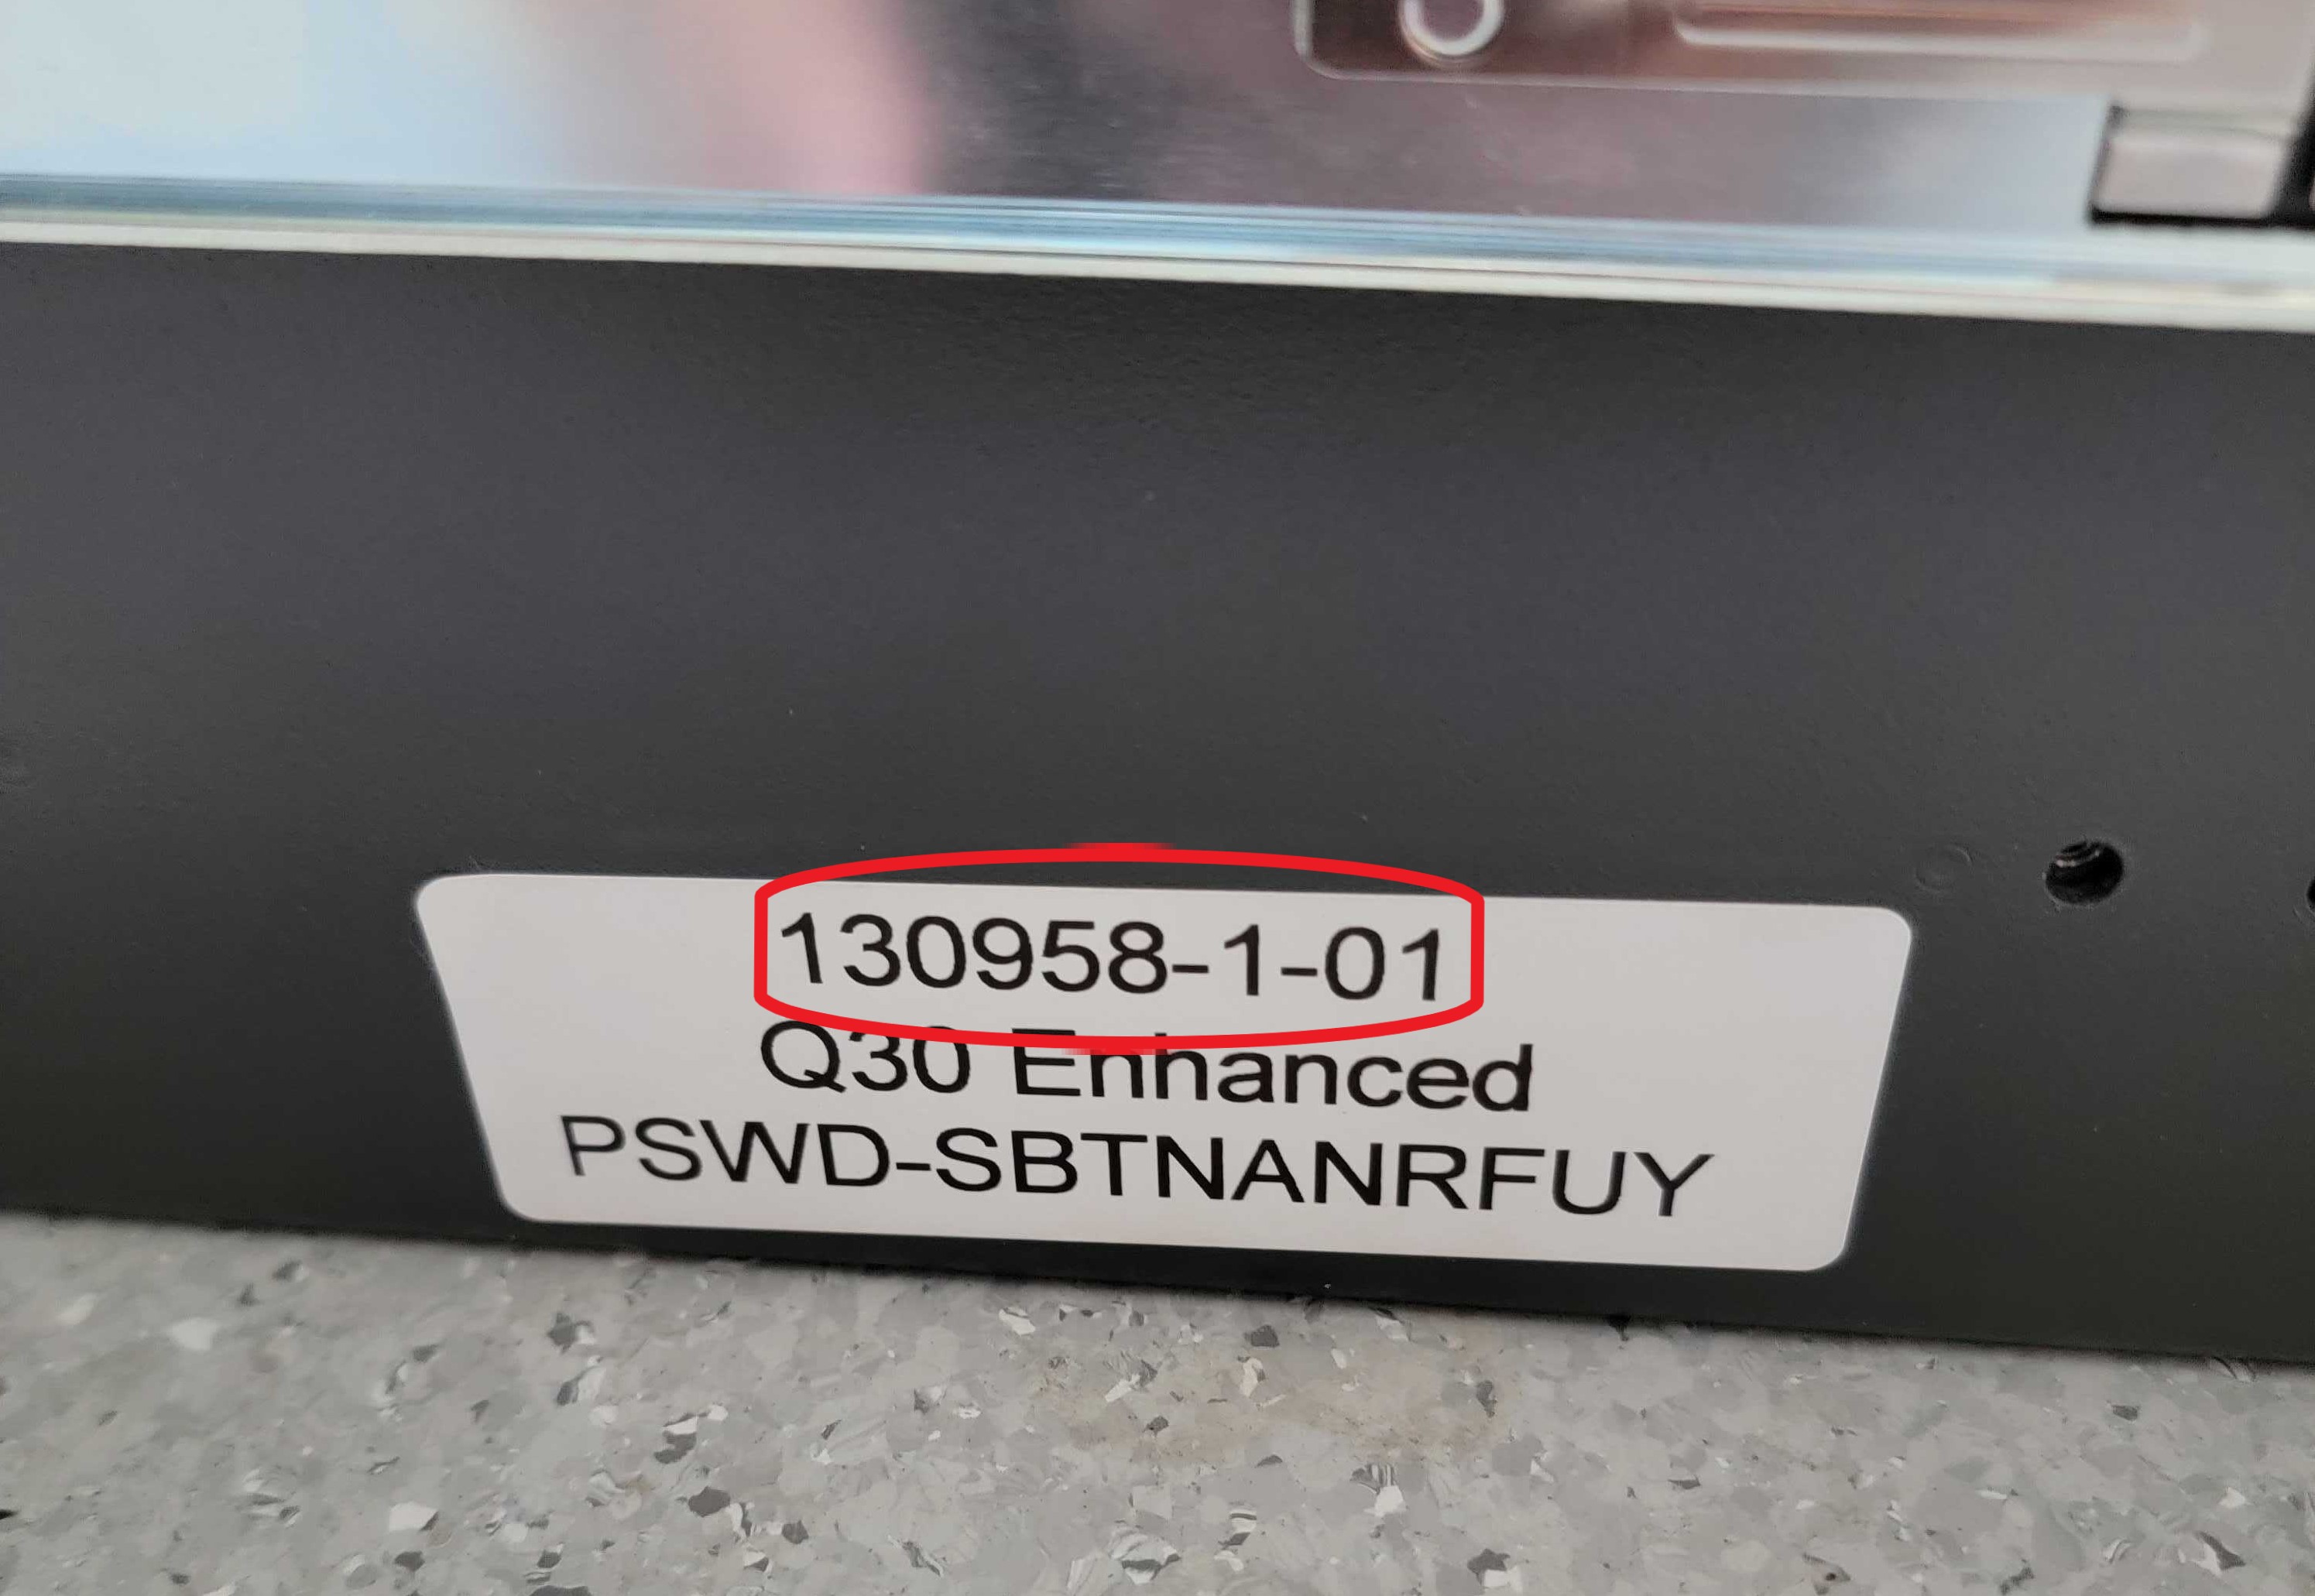 circled serial number sticker